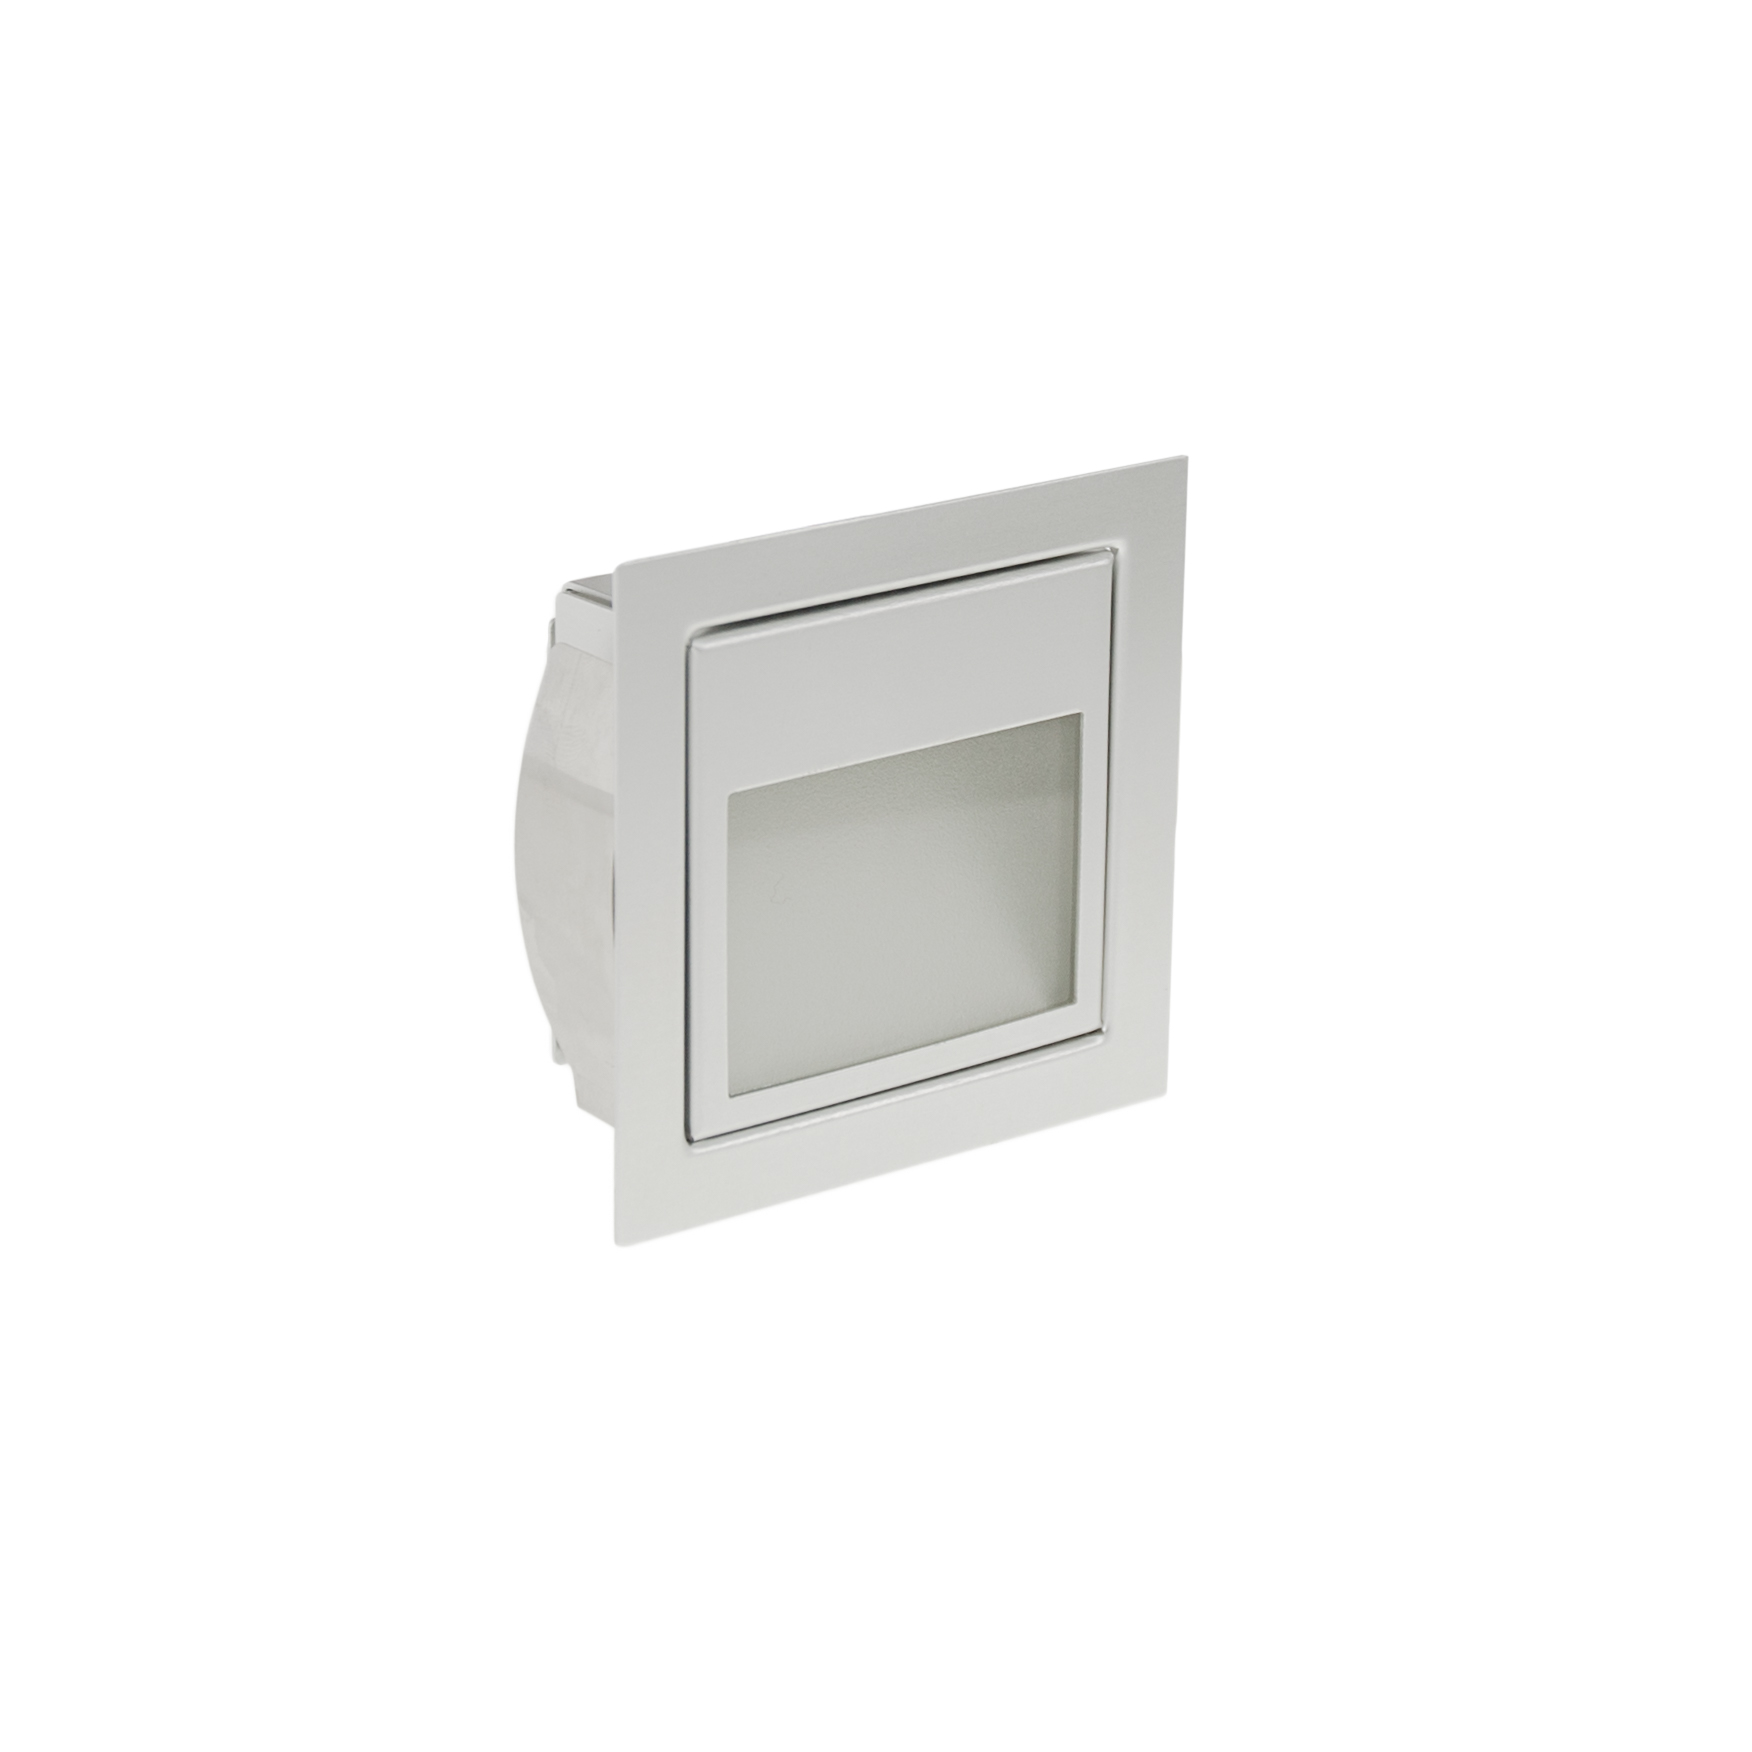 3W LED SQUARE LOW GLARE FROSTED GLASS EYELID WALL/STAIR LIGHT, 700mA CC, 3000K, SILVER ANODISED, IP20